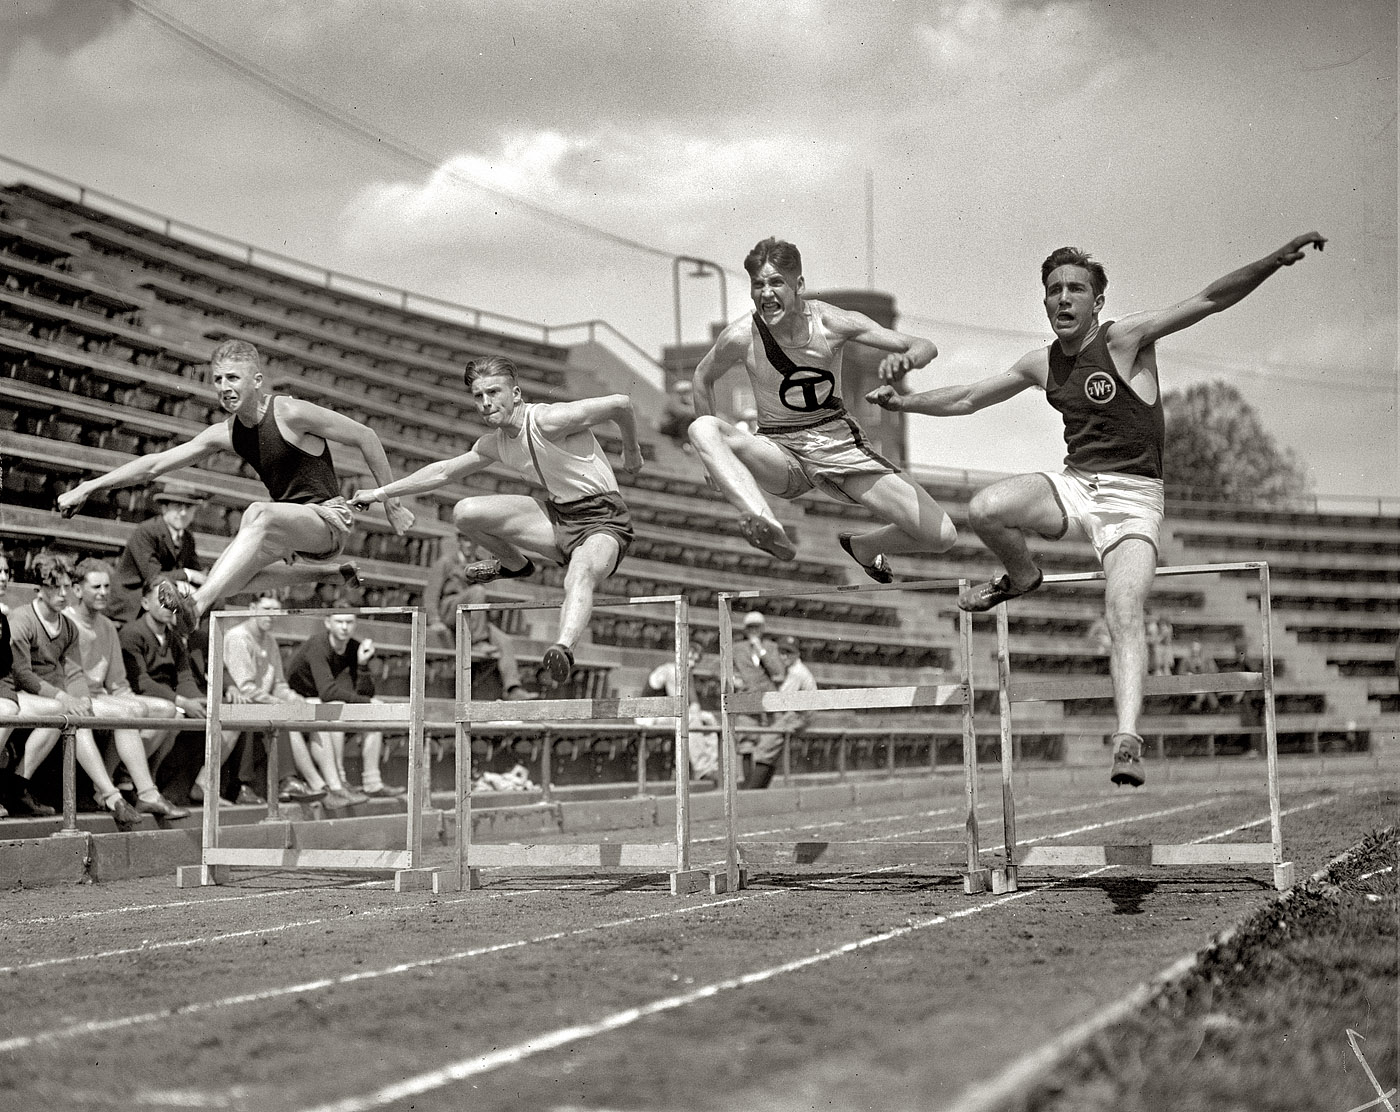 Washington, D.C. May 31, 1924. "High school track." National Photo Company Collection glass negative, Library of Congress. View full size.